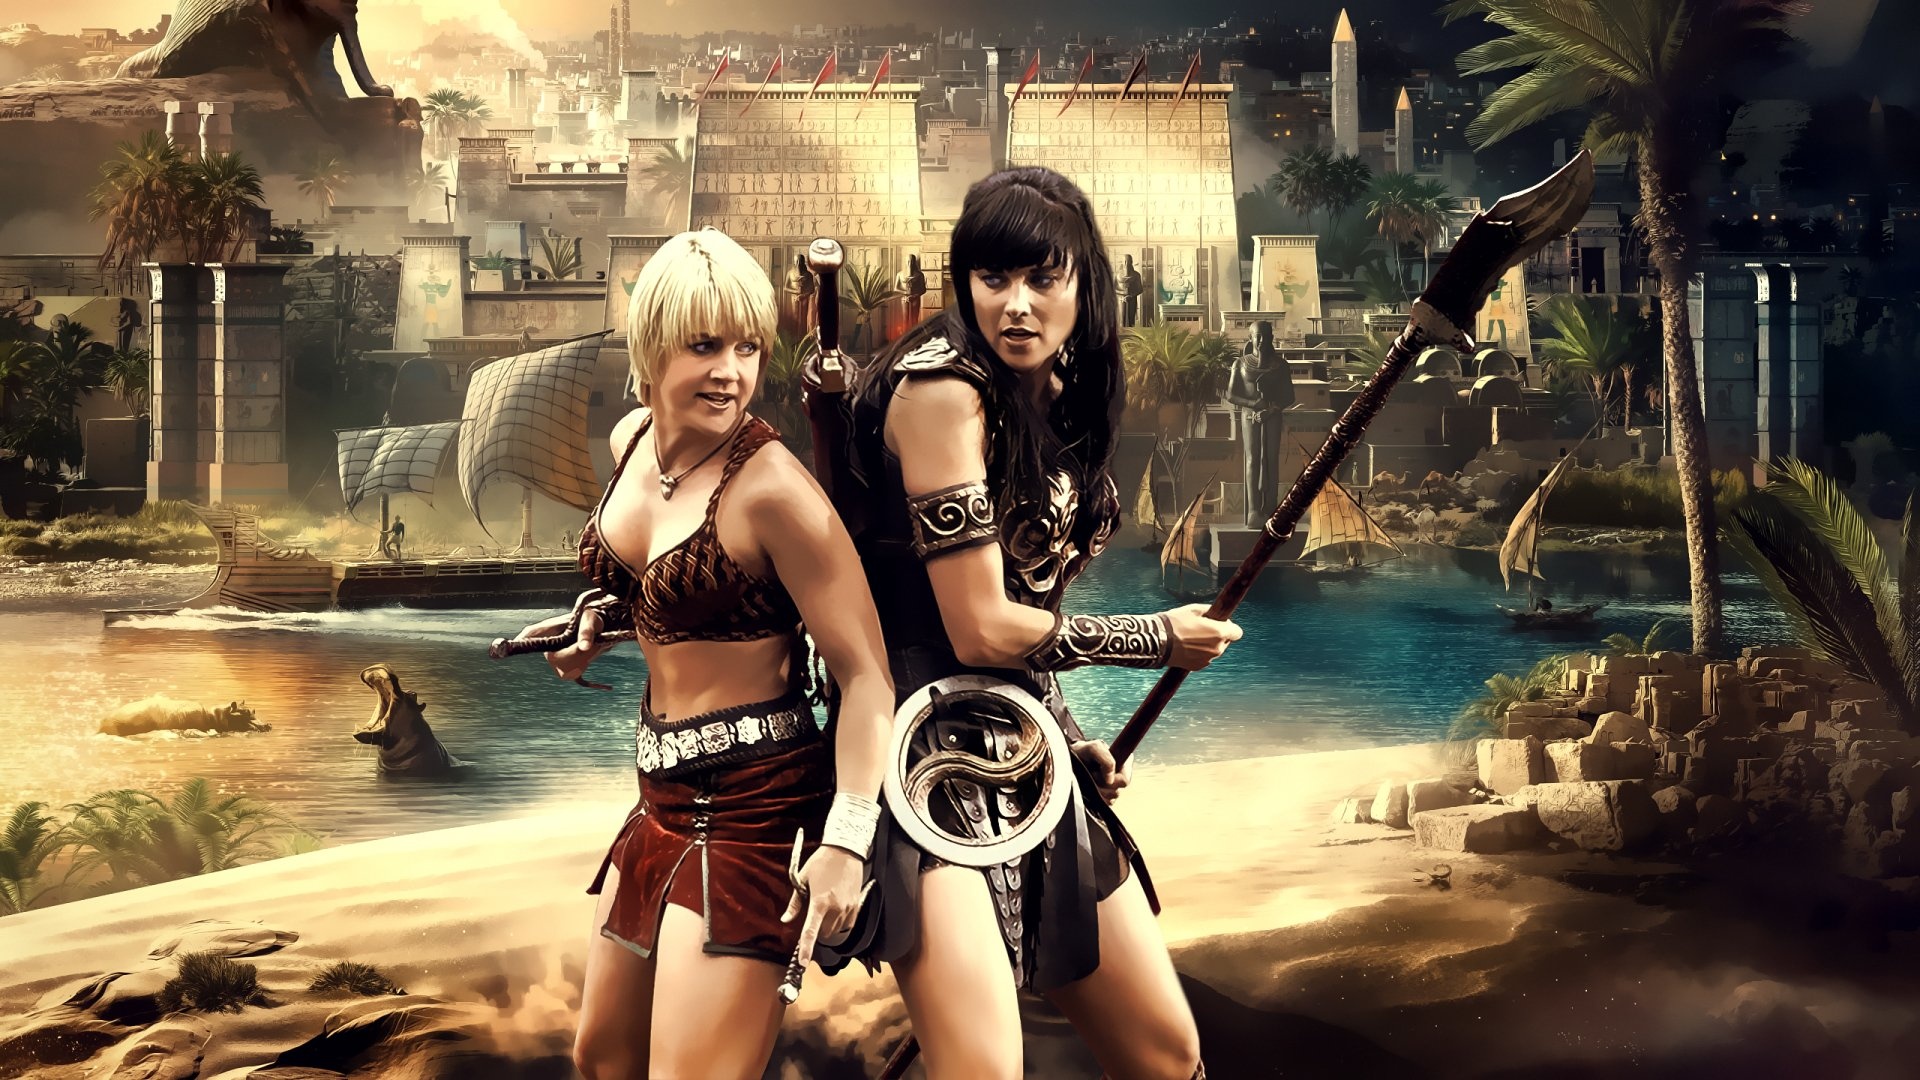 Renee O'Connor: Xena and Gabrielle, Going up against the evil Yodoshi, An army of elite Samurai warriors. 1920x1080 Full HD Wallpaper.